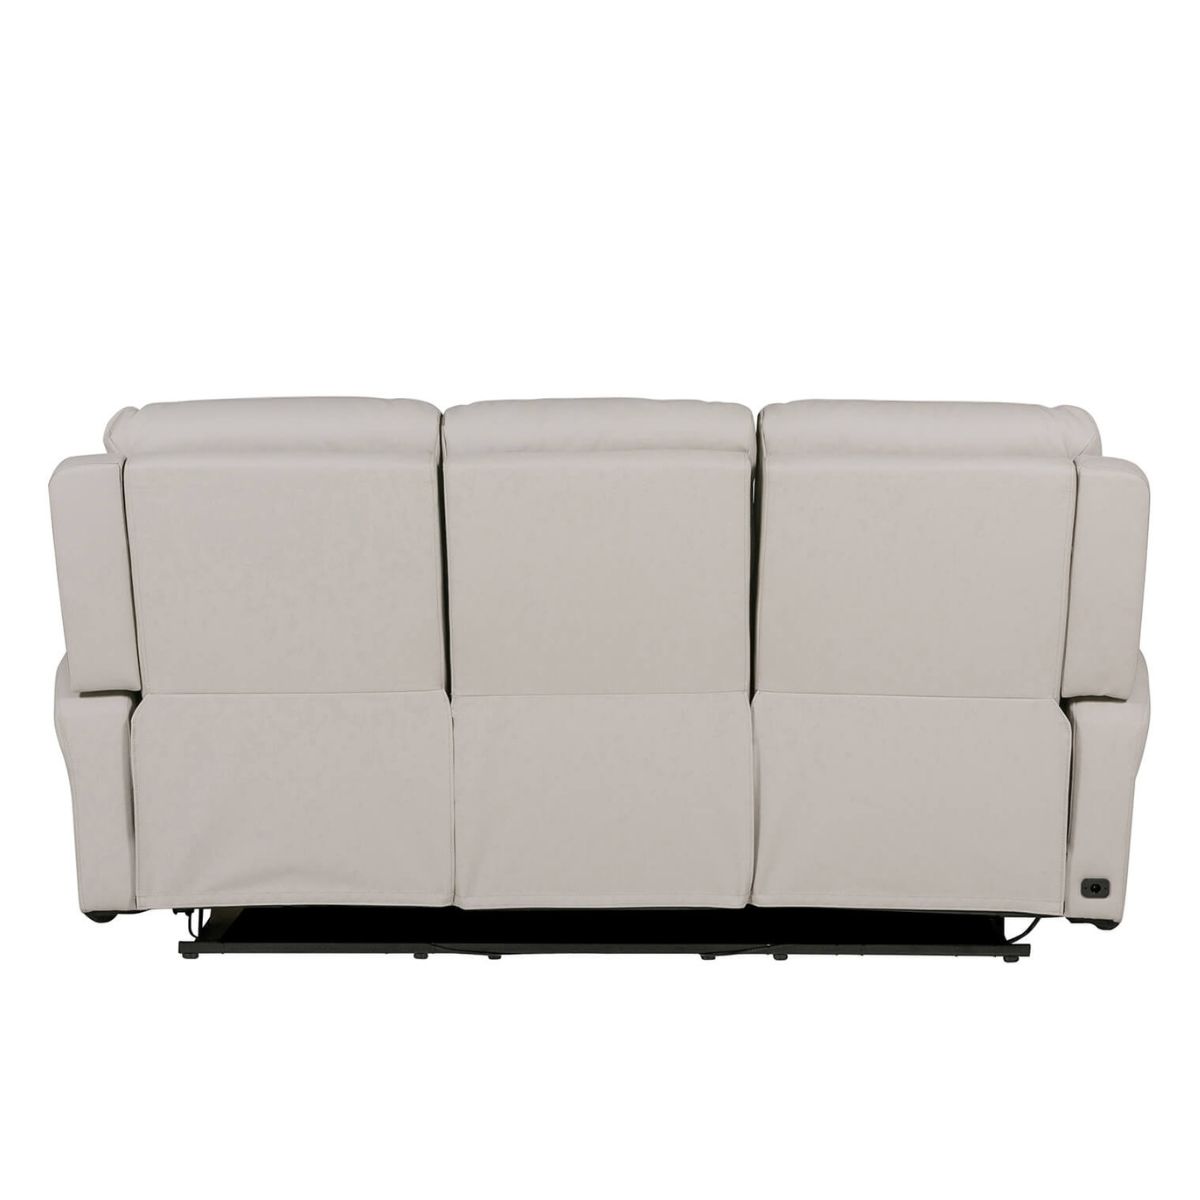 Rosslare Leather 3 Seater Electric Recliner Beige - 4